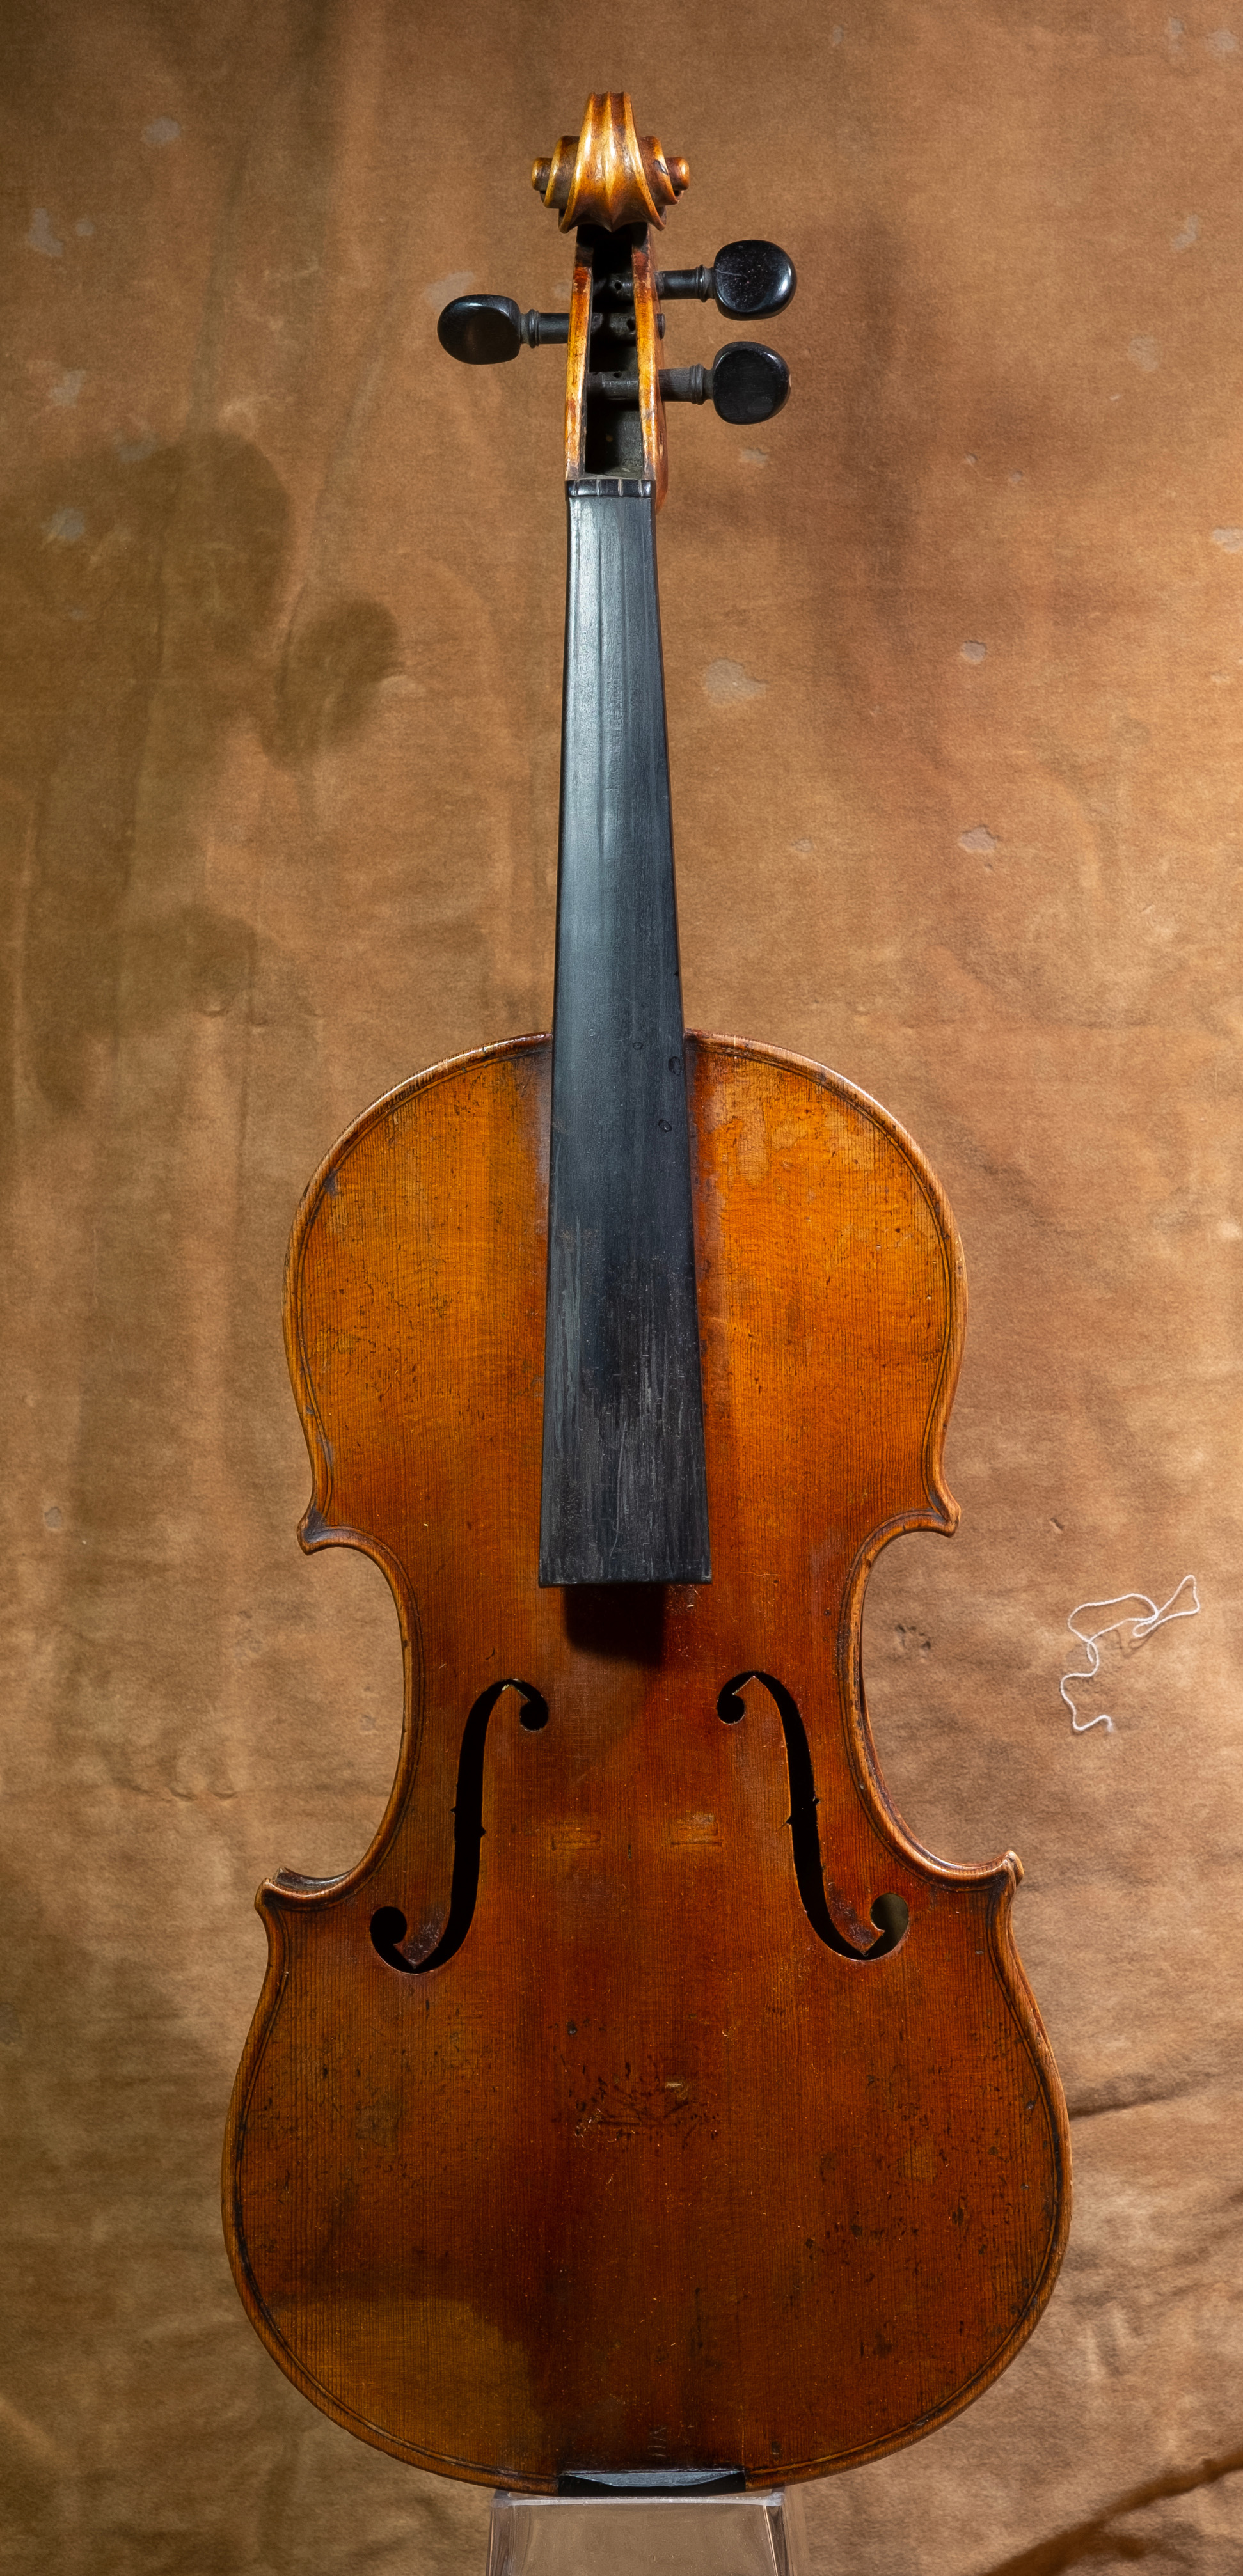 Paul Leeser escaped from late-1930s Germany with this violin (Photo provided by Violins of Hope)